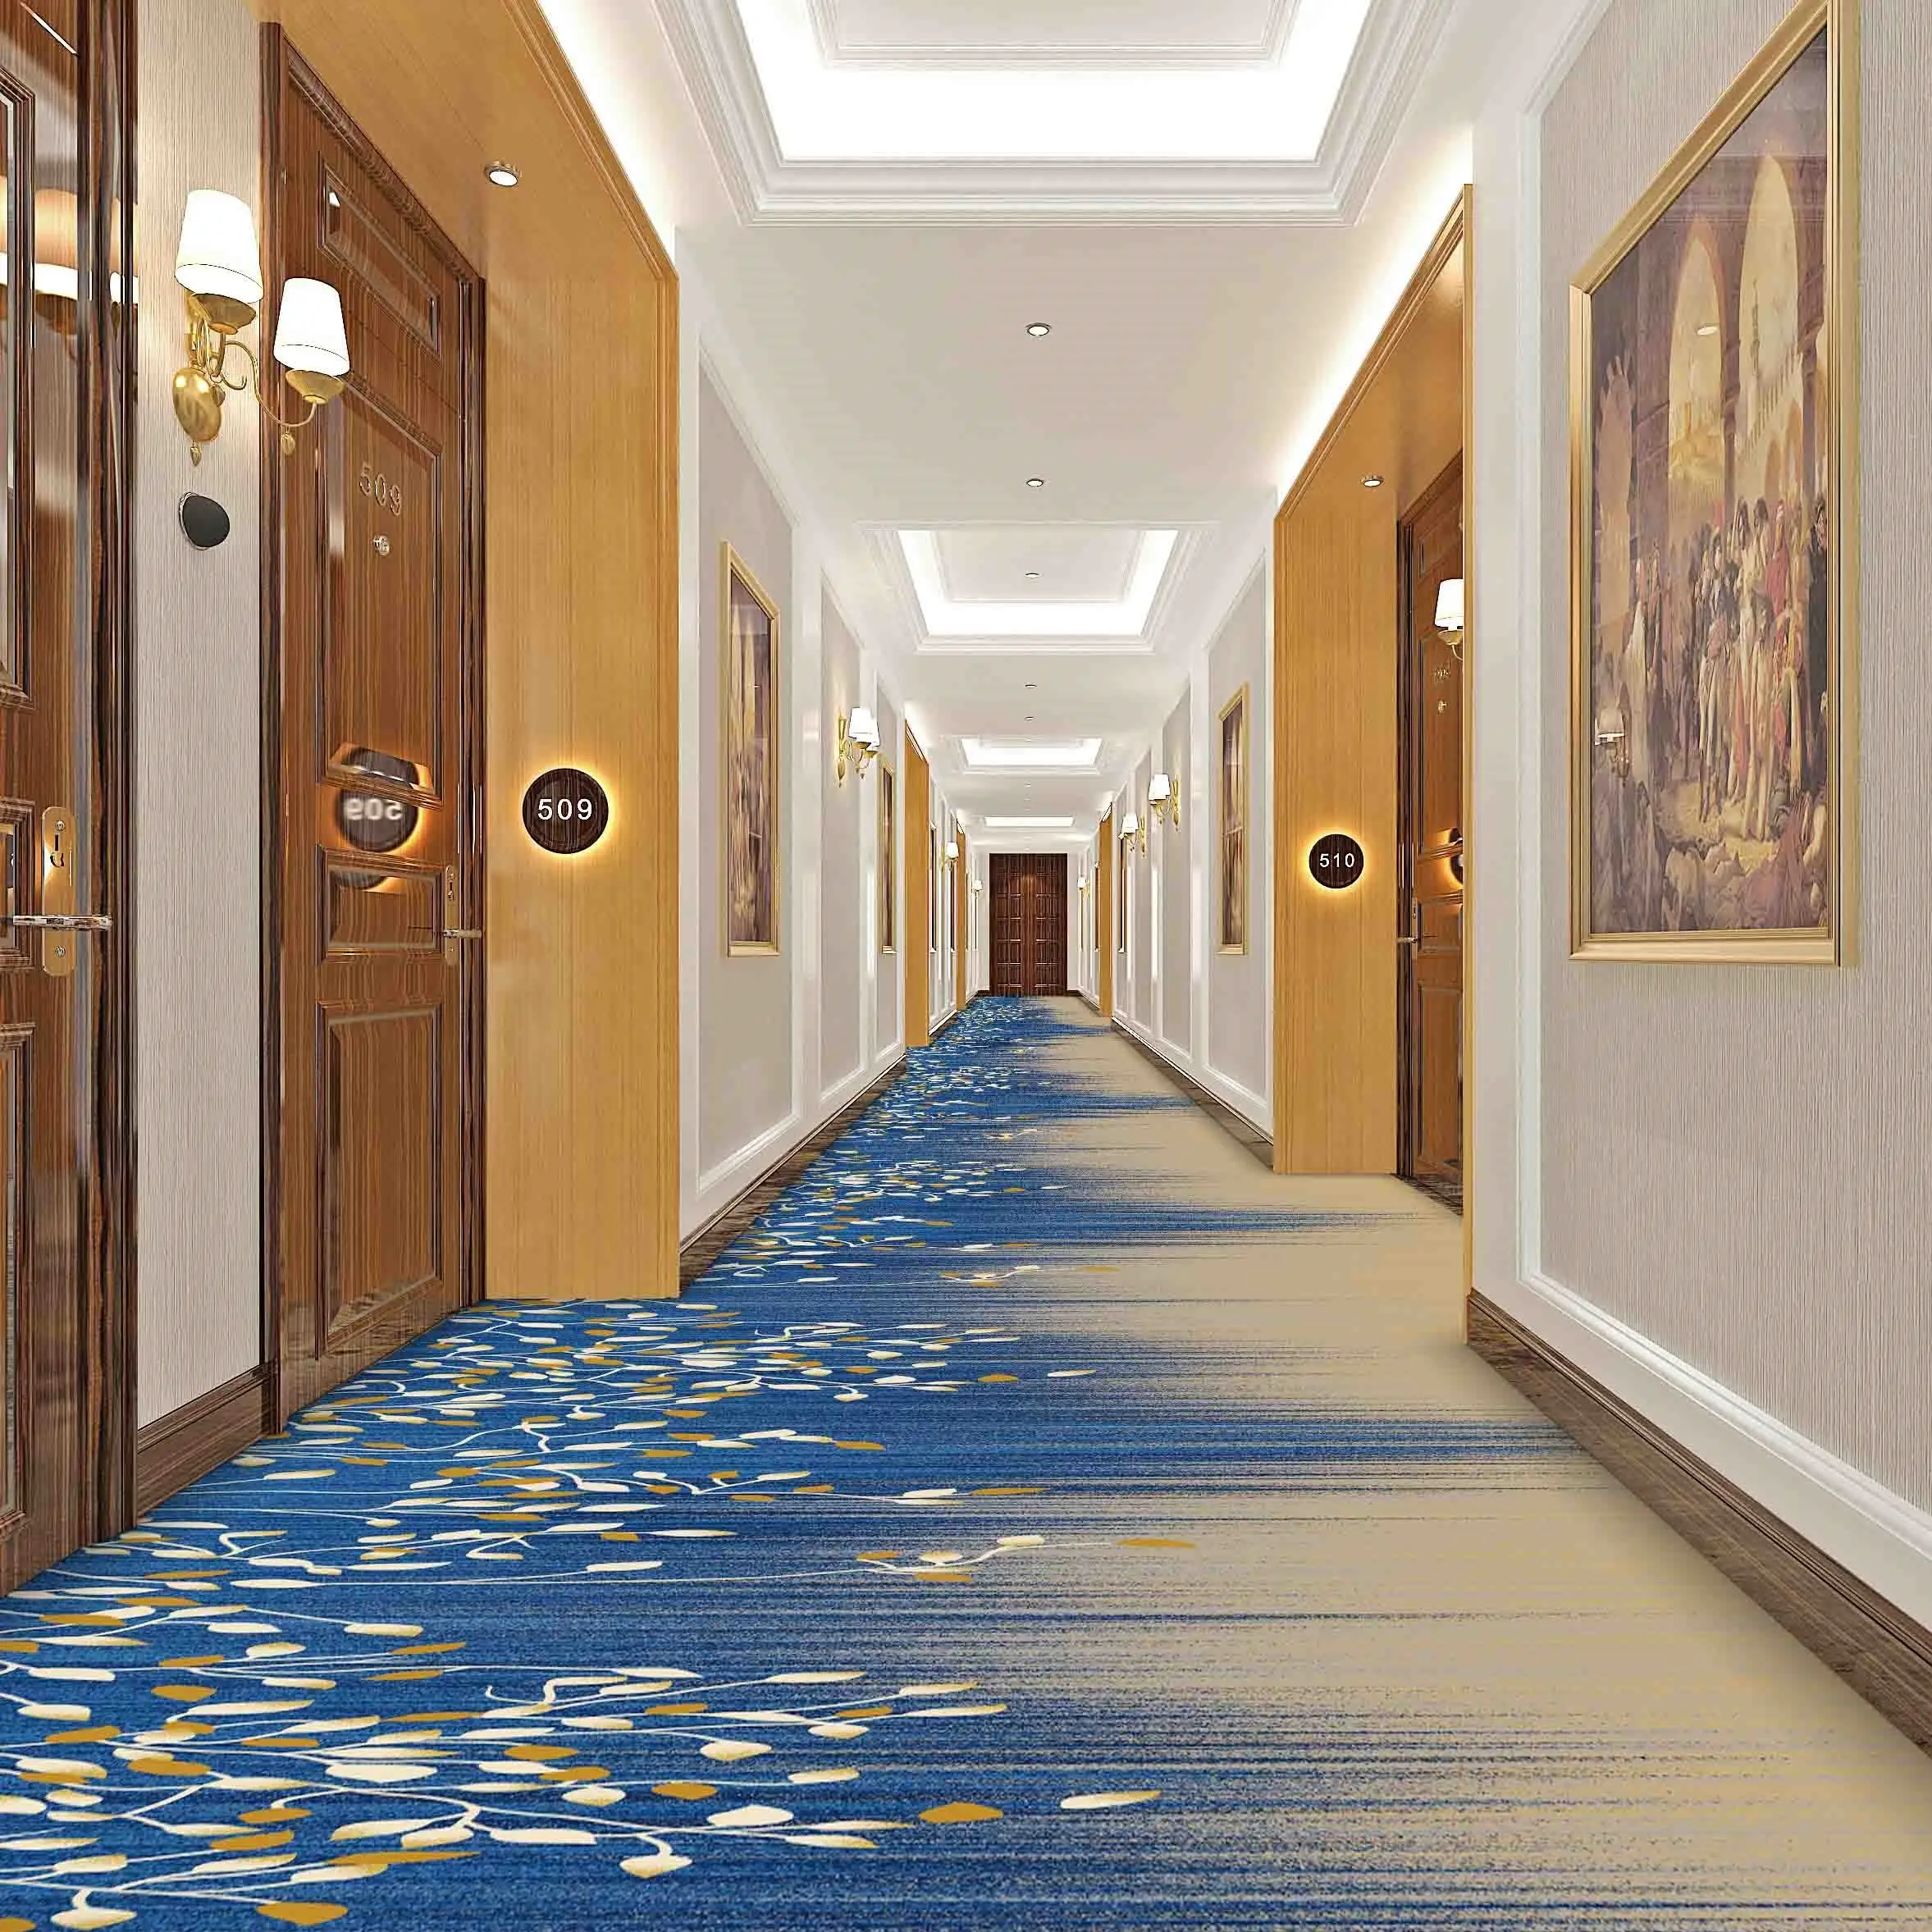 Hotel corridor path dedicated full cover printed carpet nylon material a variety of colors can be customized